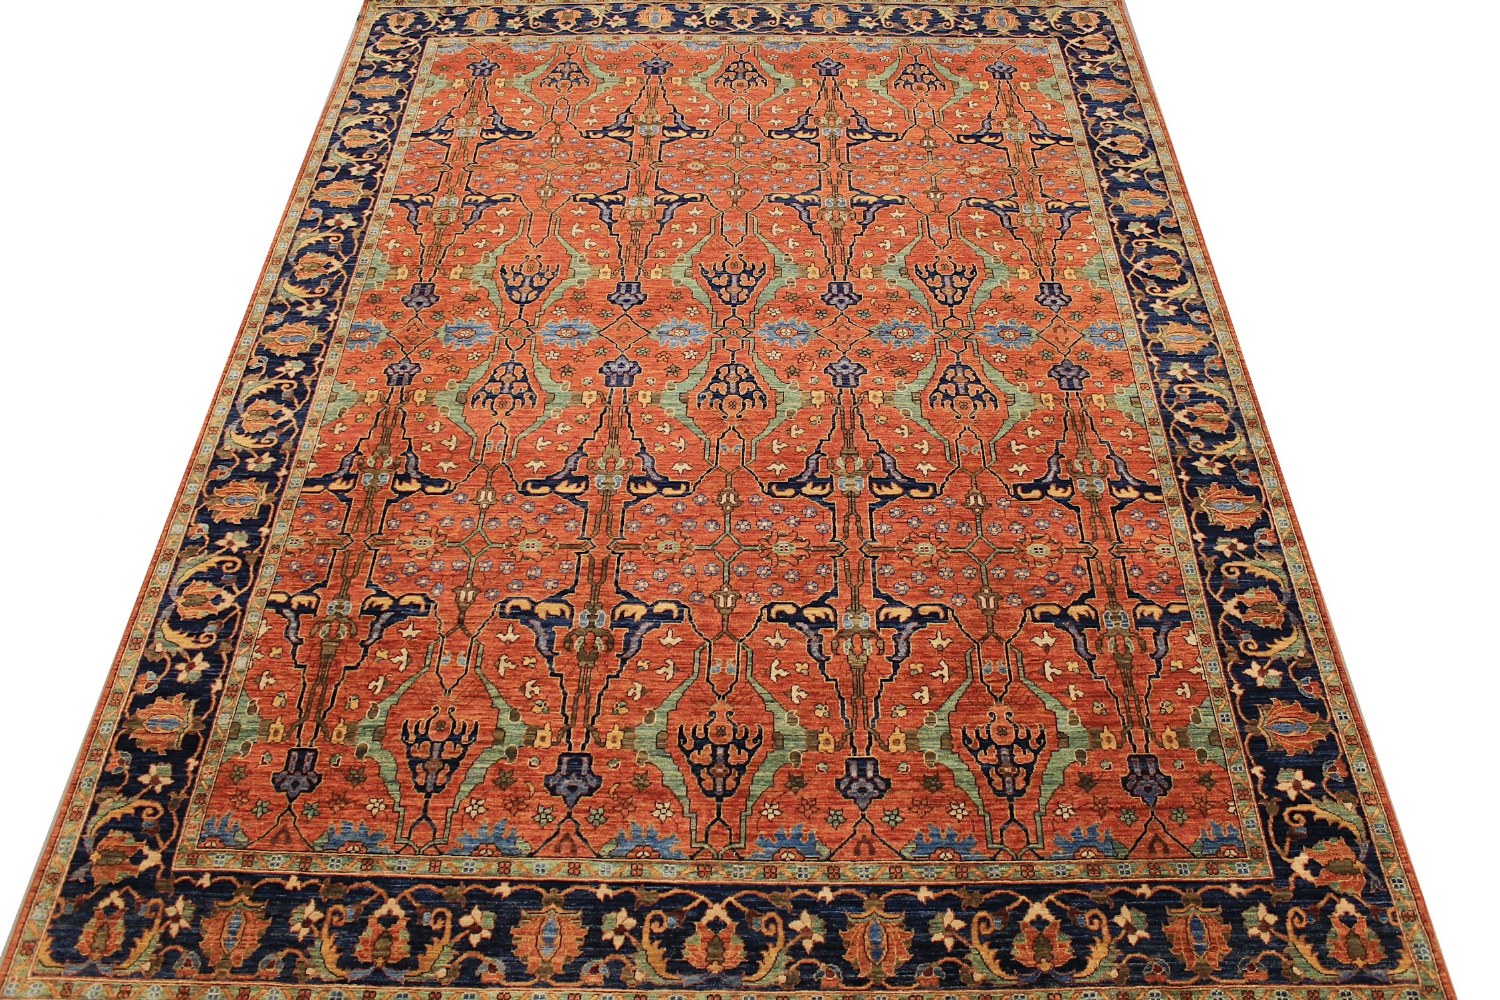 9x12 Aryana & Antique Revivals Hand Knotted Wool Area Rug - MR028852